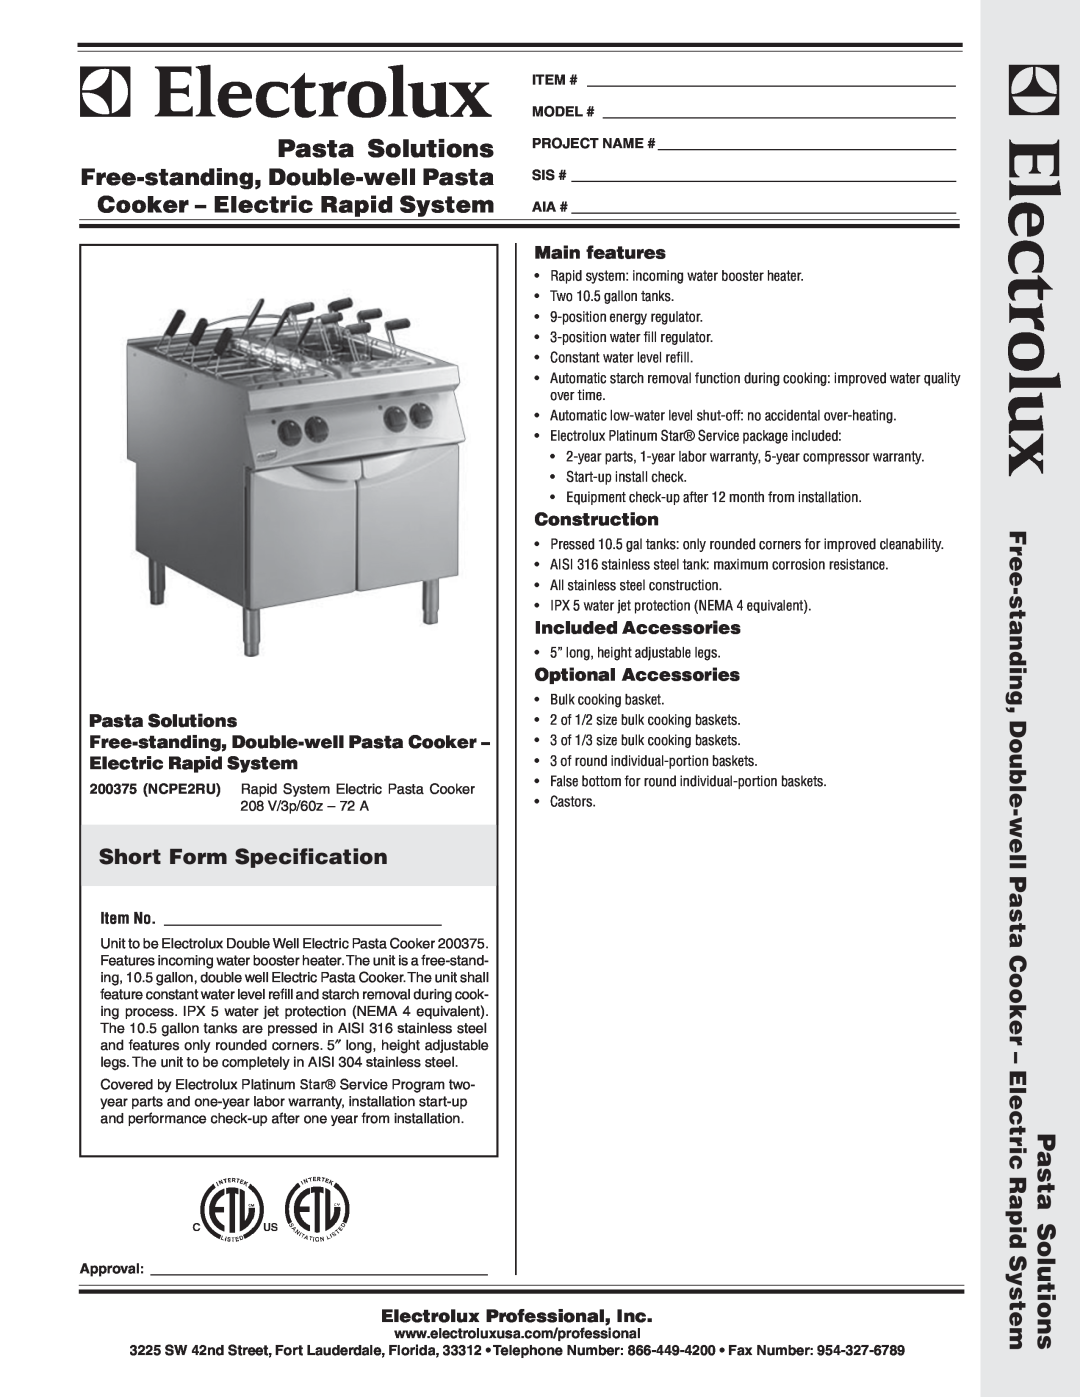 Electrolux 200375 warranty Short Form Specification, Pasta Solutions, Free-standing, Double-wellPasta Cooker, Construction 